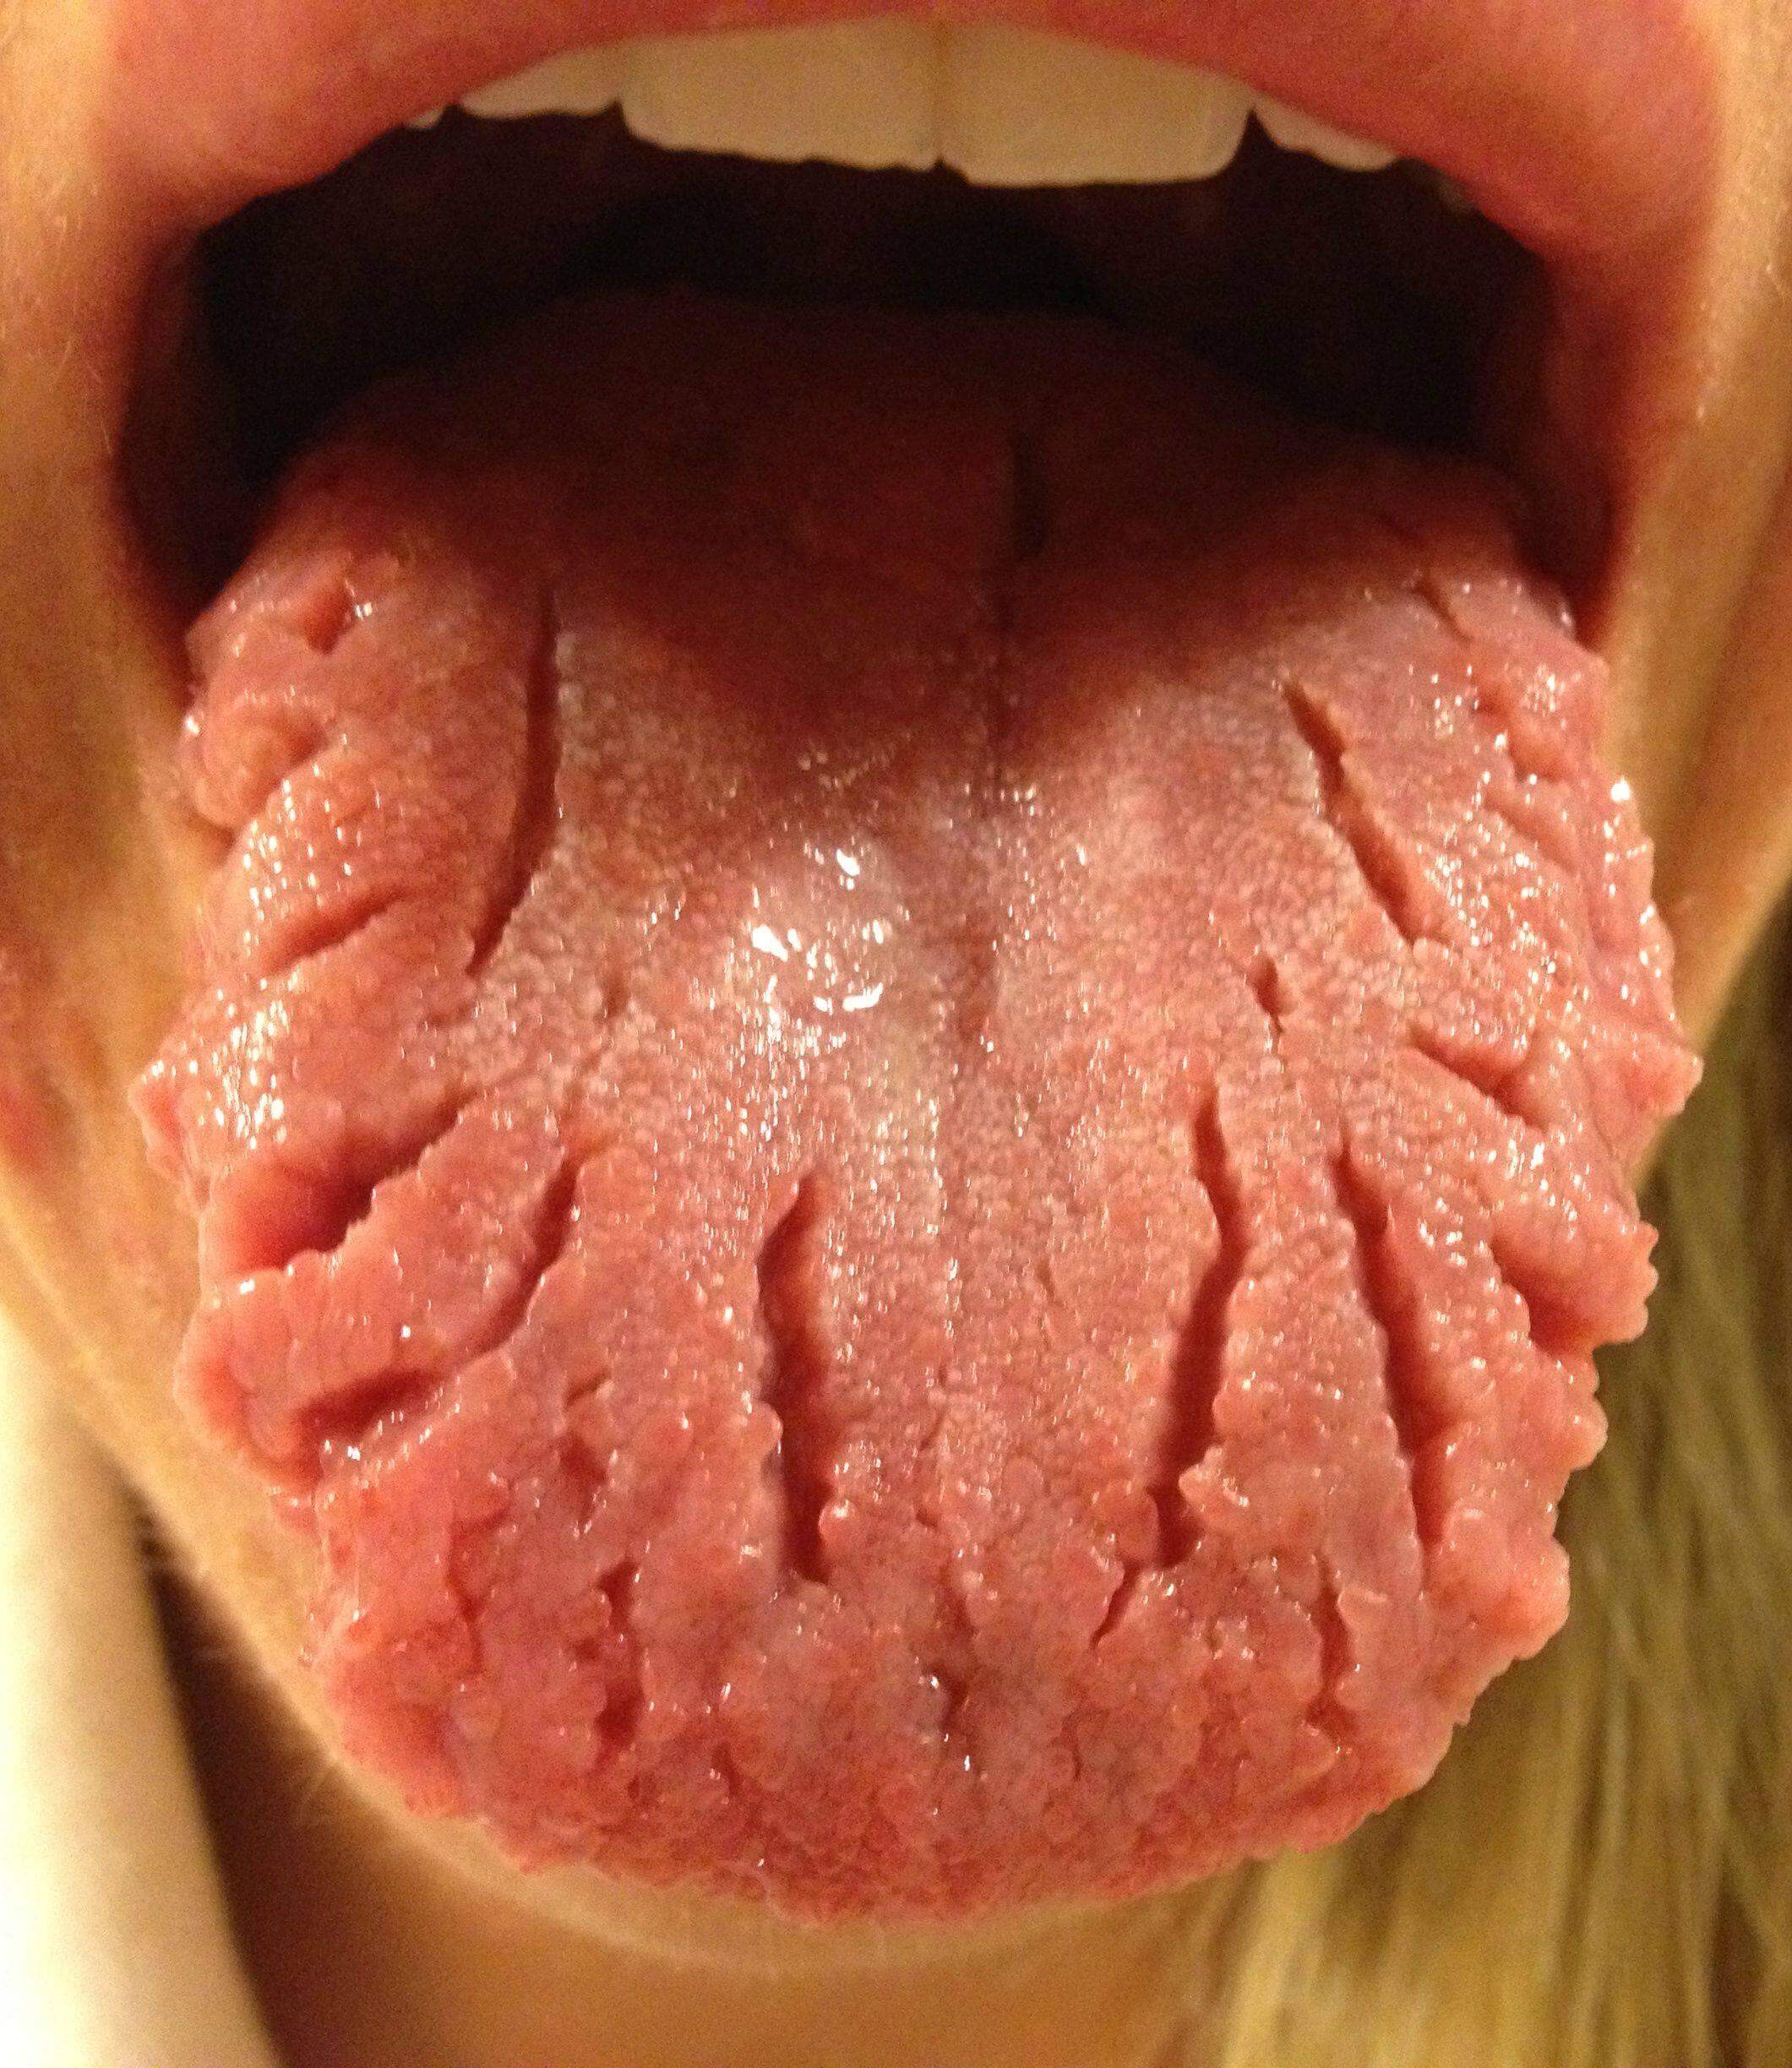 fissured tongue pictures